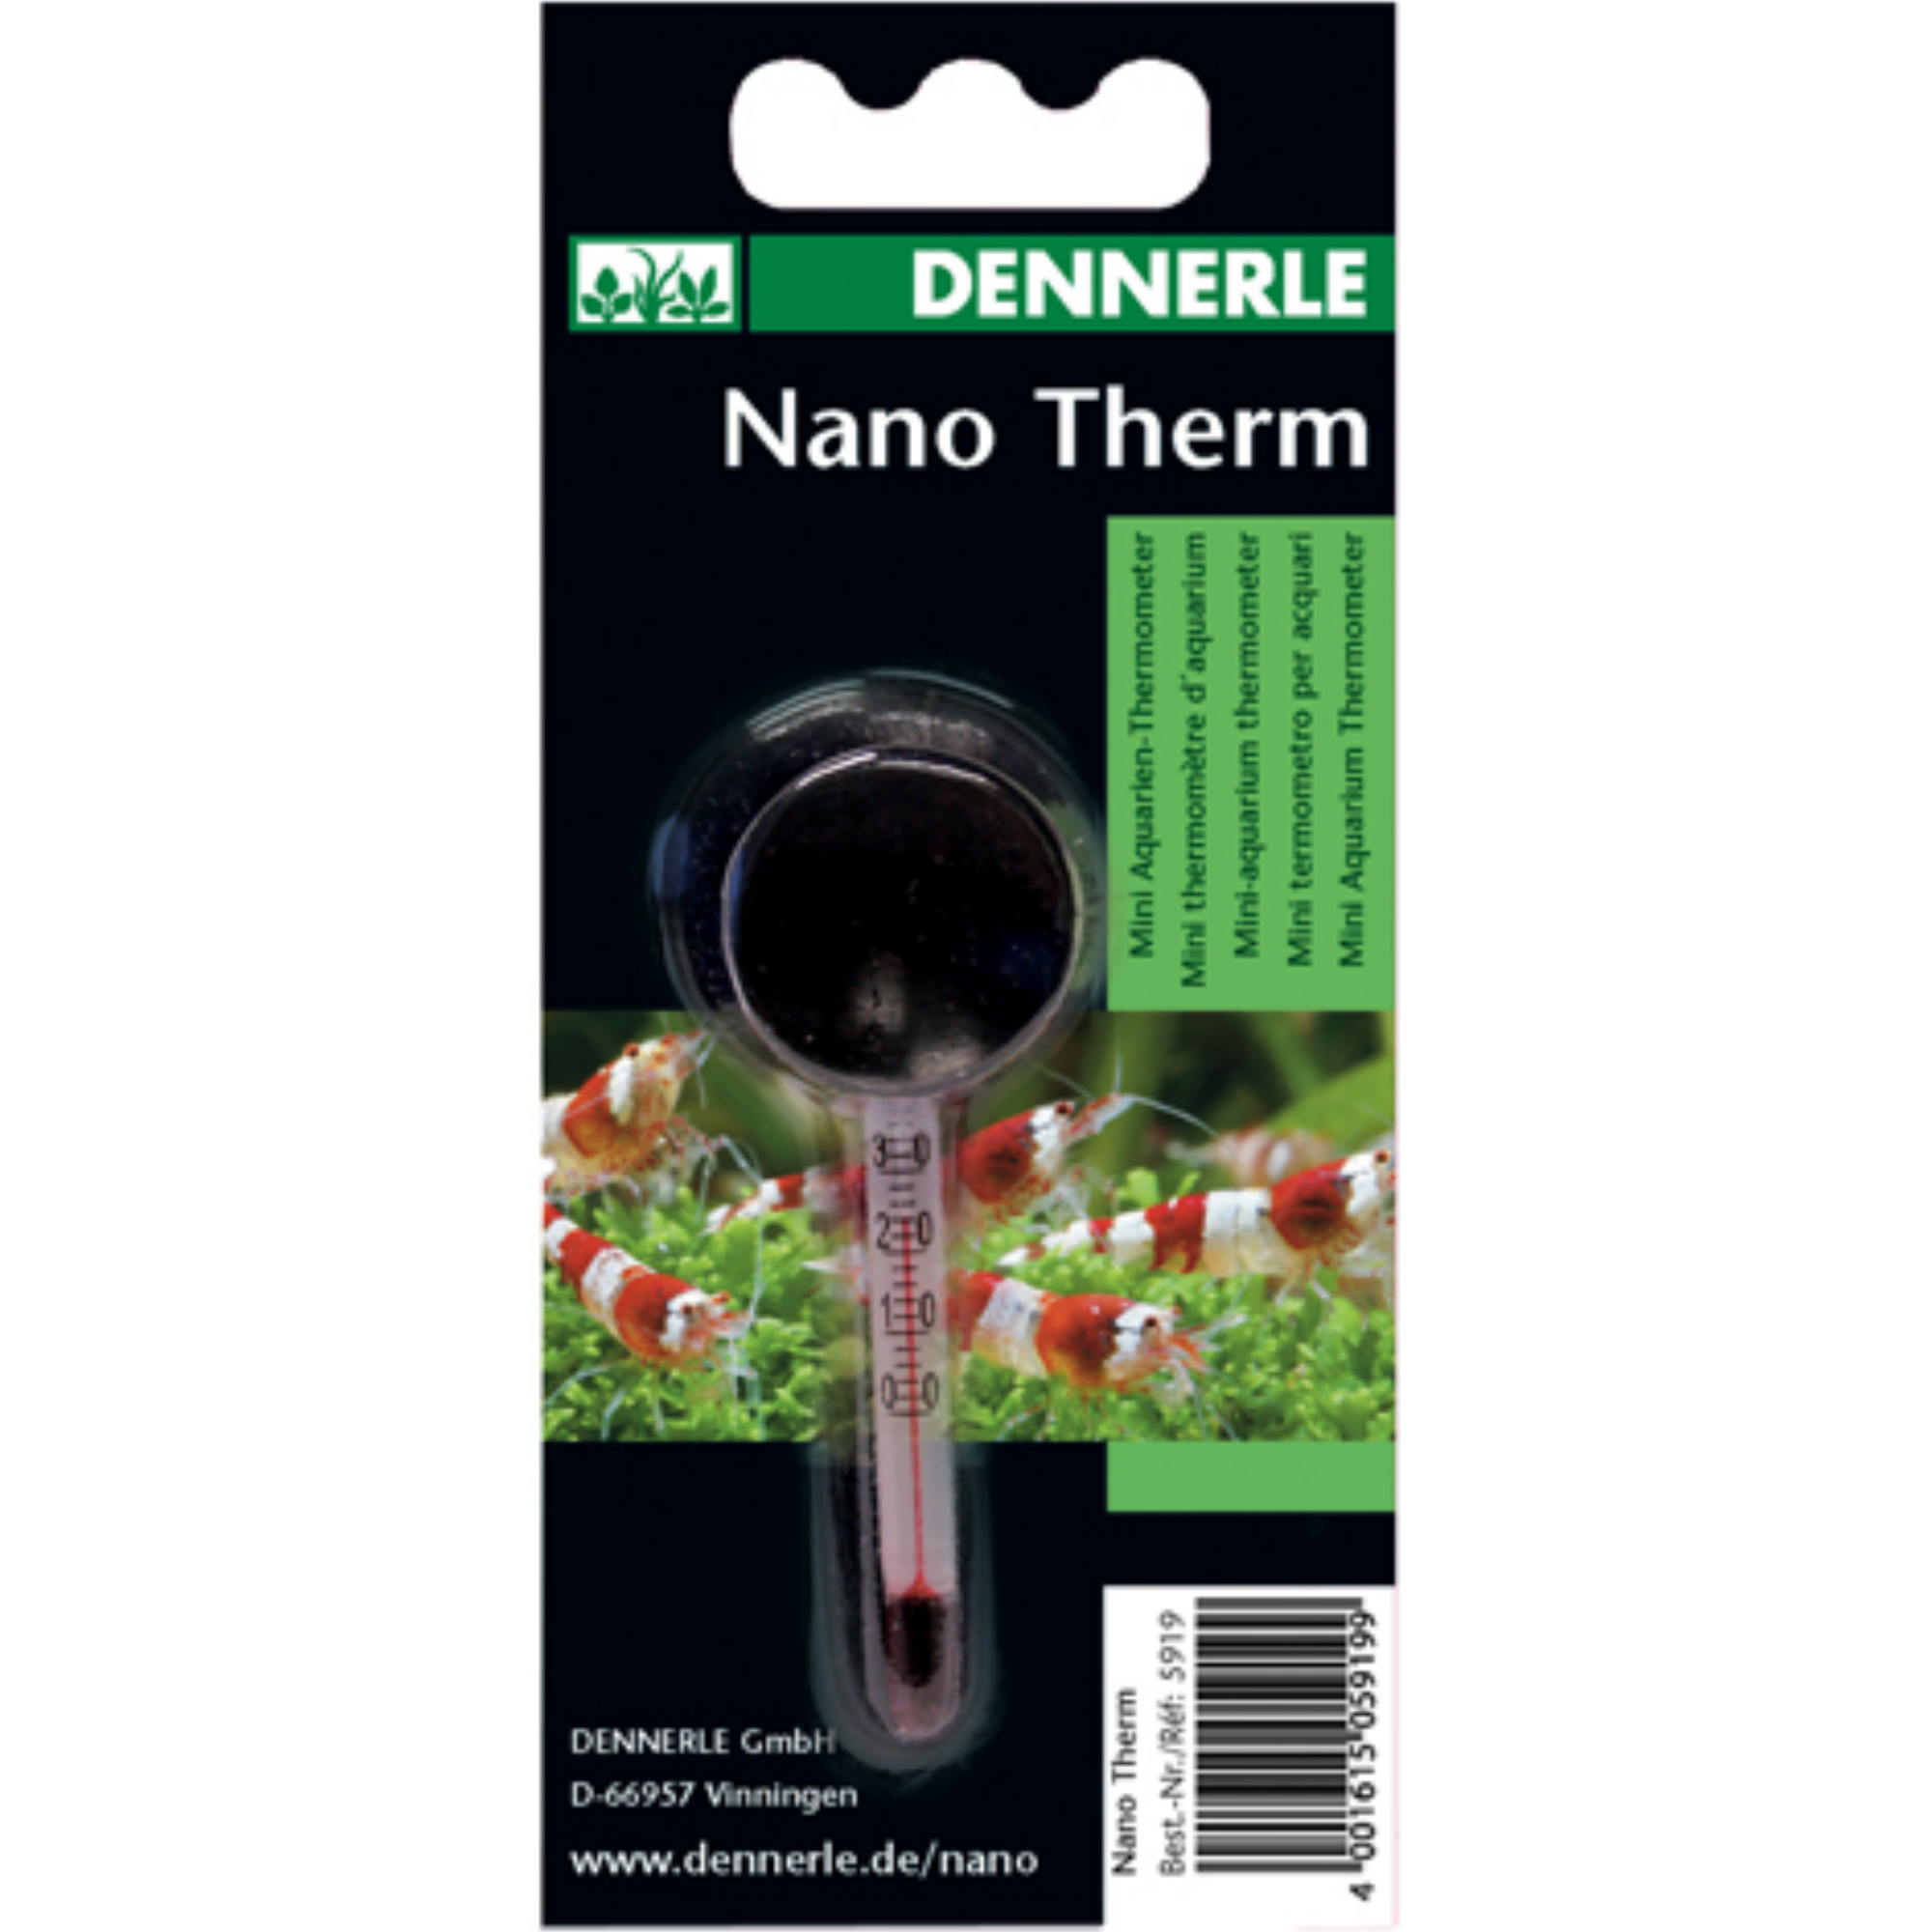 Nanotherm Mini-Thermometer + product picture